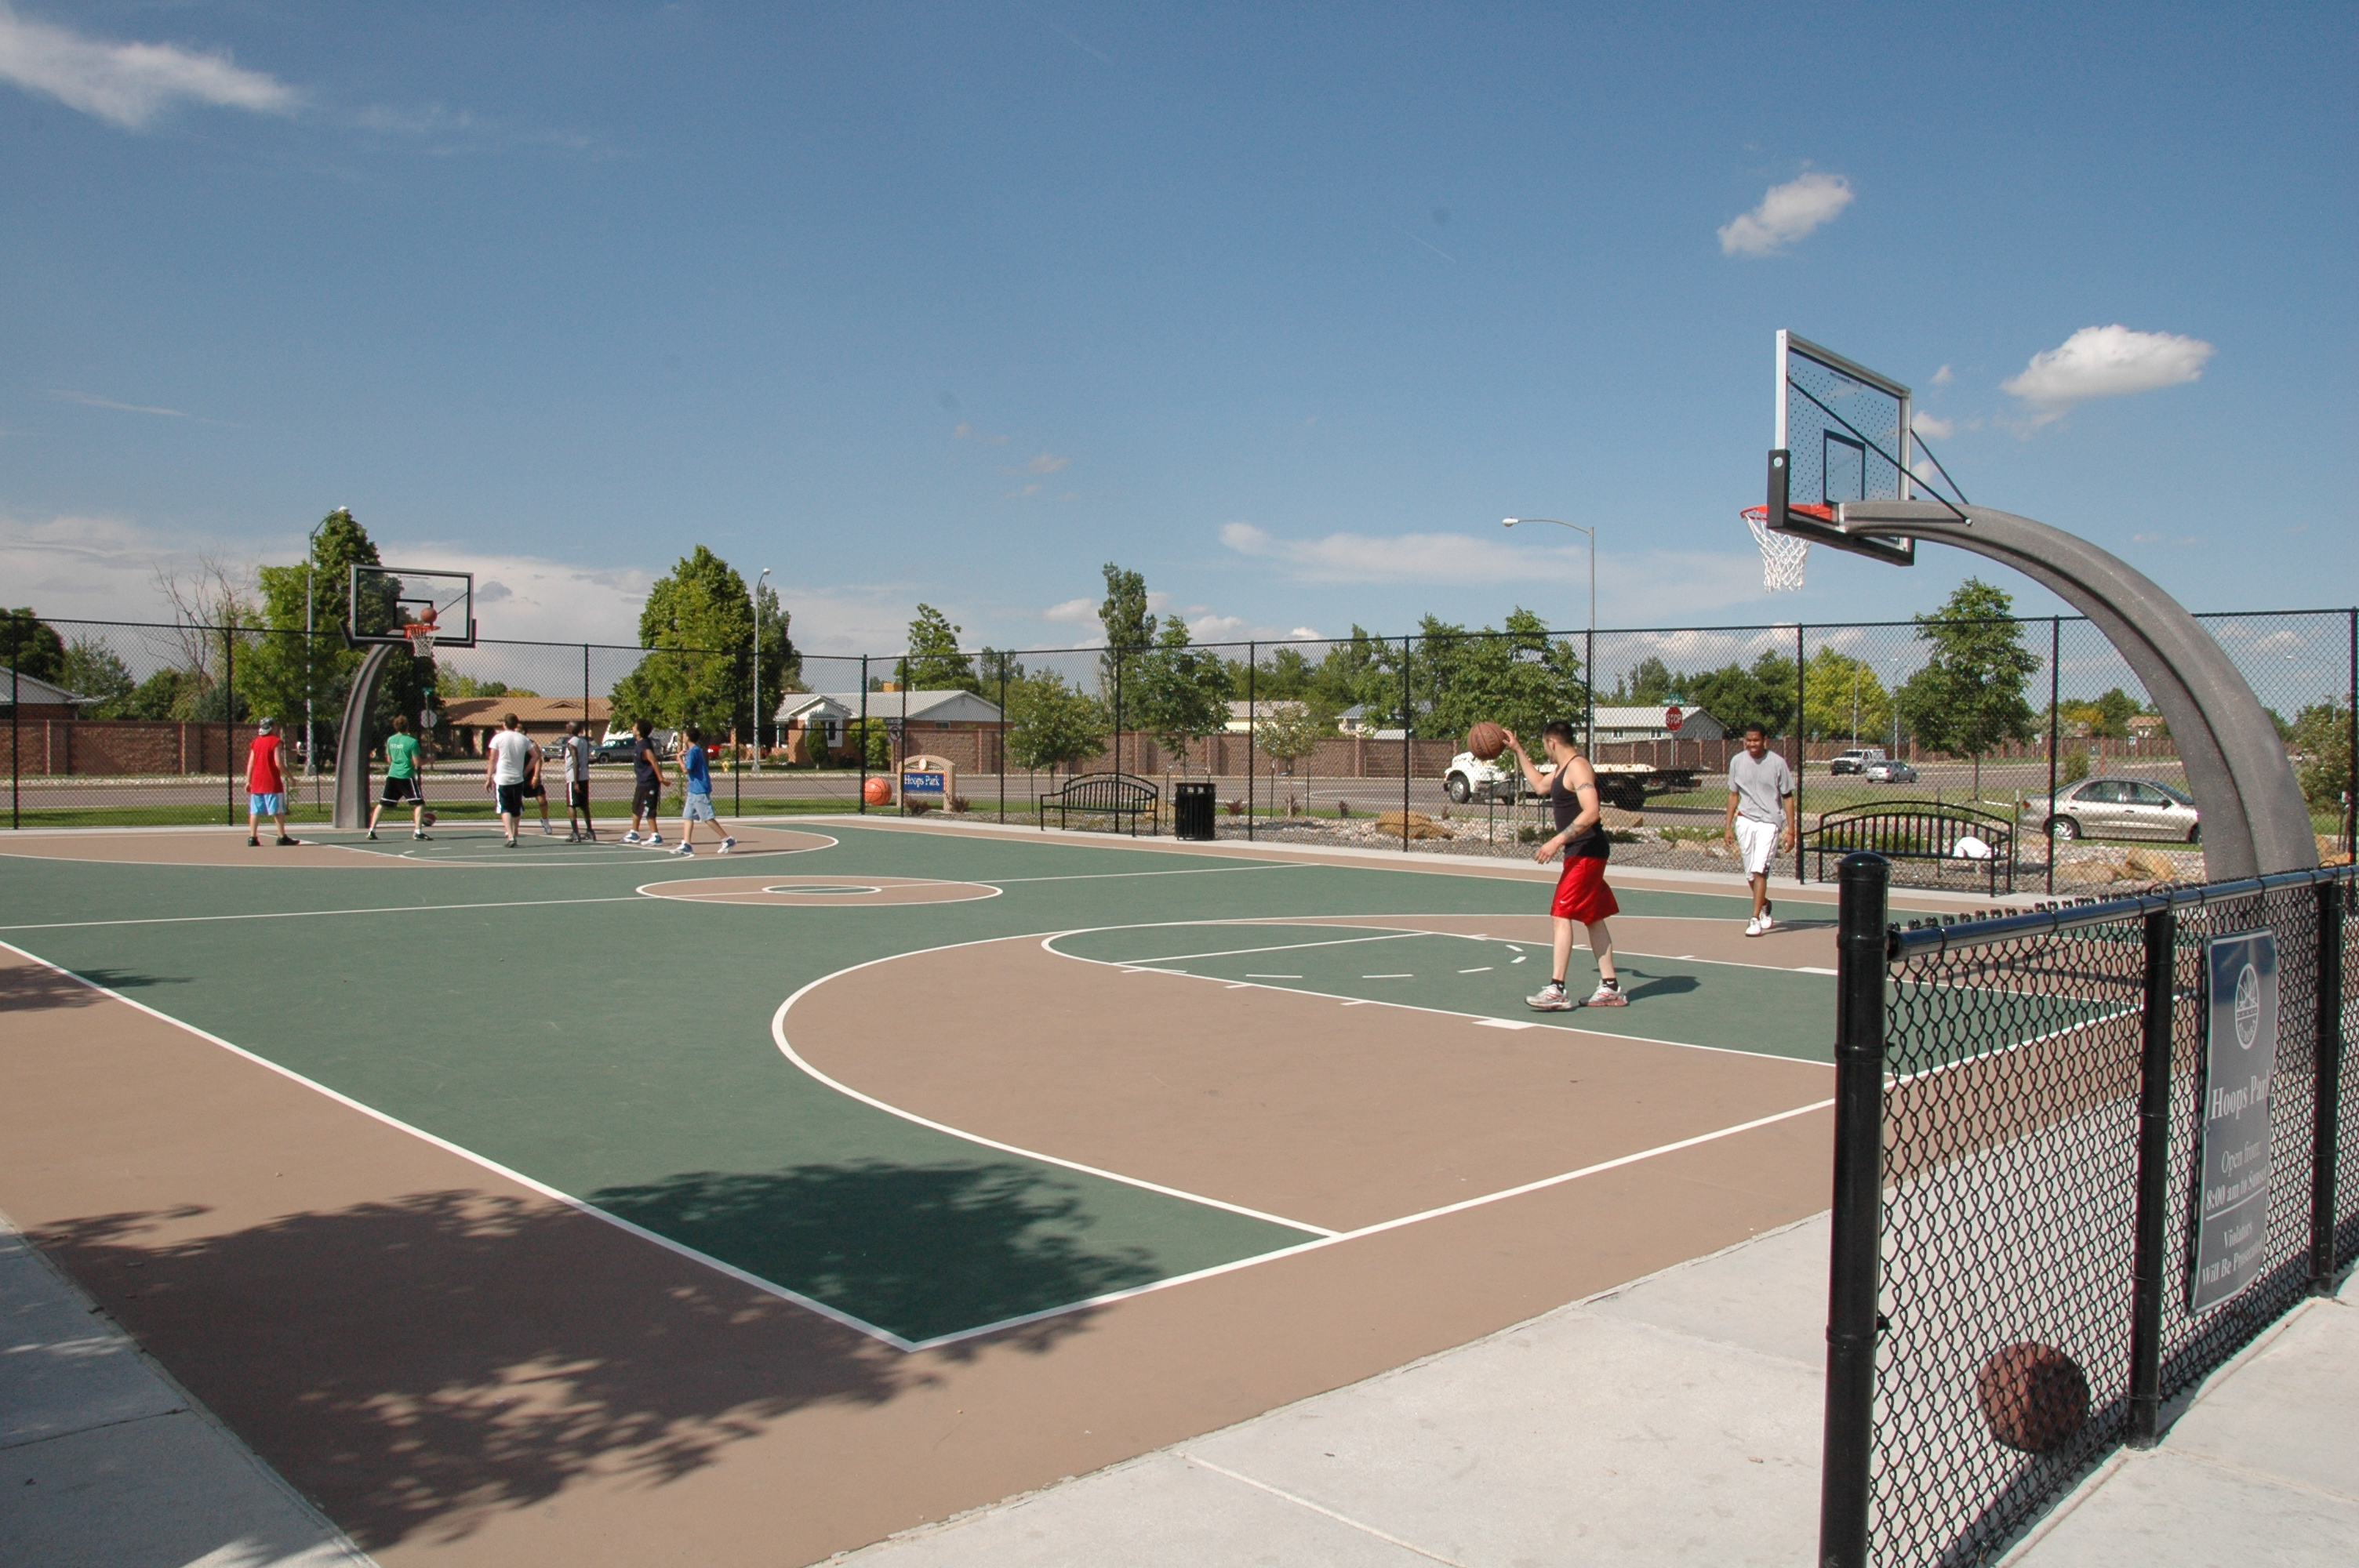 Hoops Park basketball court in Aurora, CO